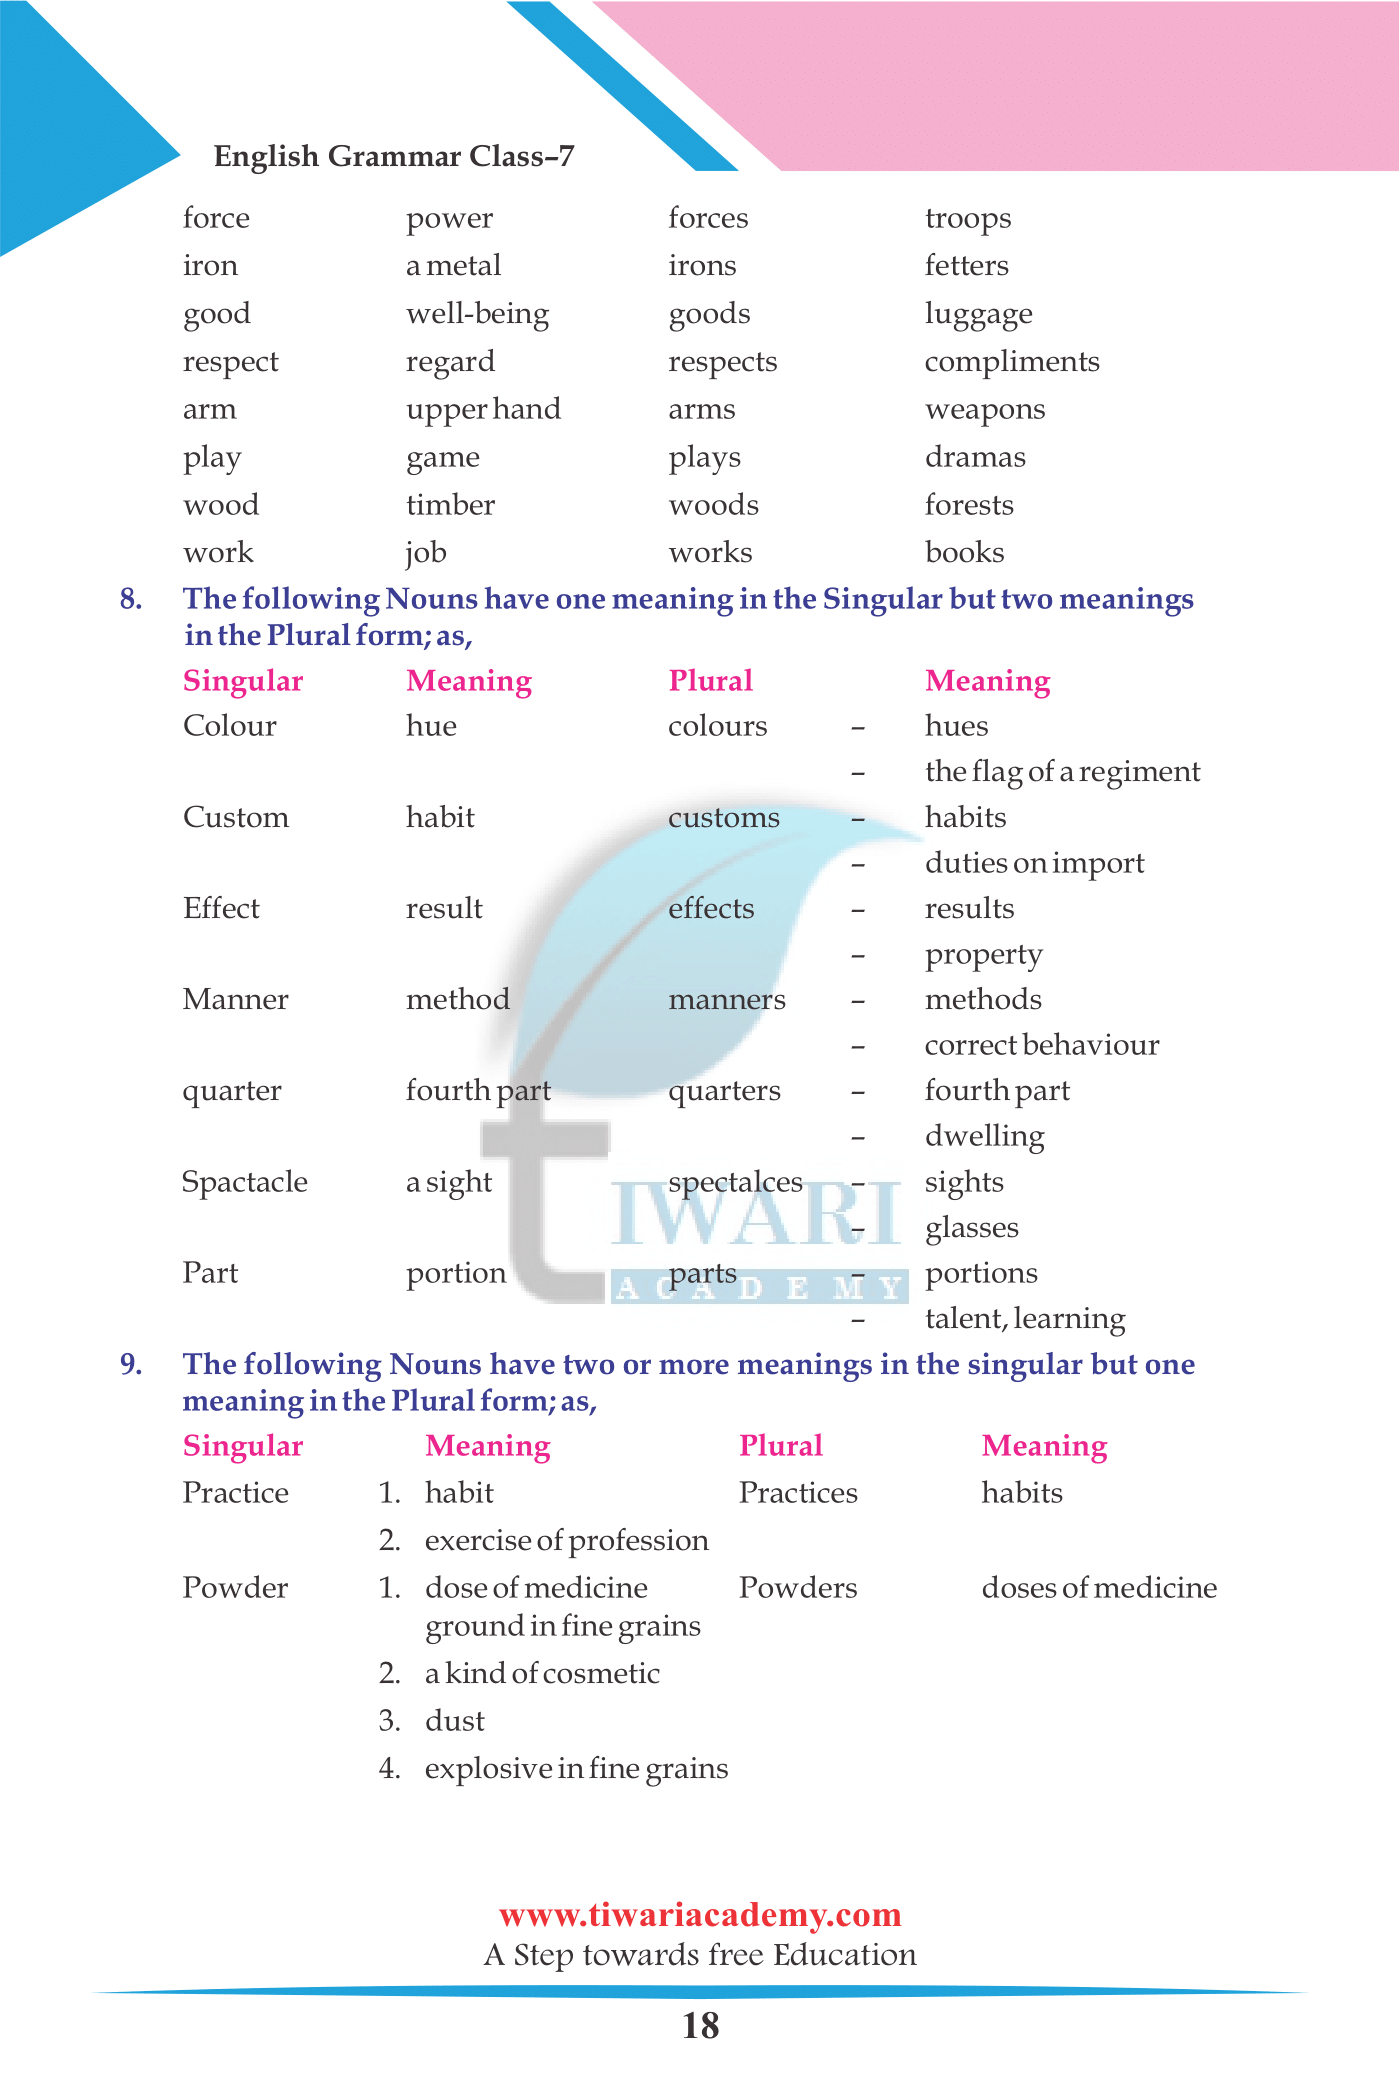 Chapter 3 English Grammar of 7th class